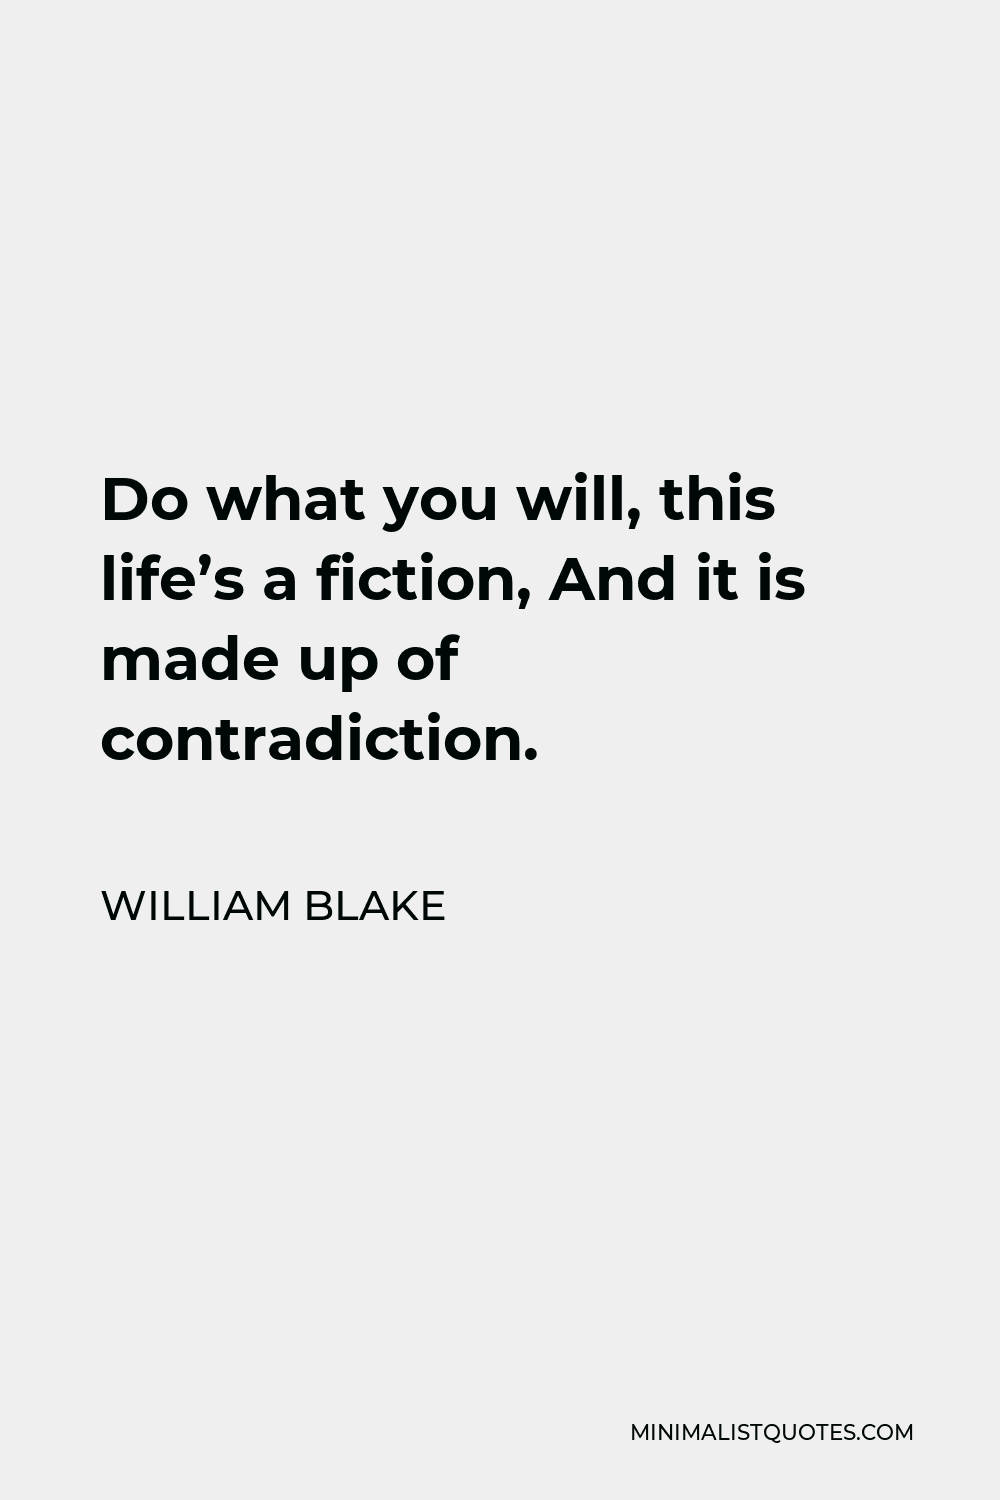 William Blake Quote - Do what you will, this life’s a fiction, And it is made up of contradiction.